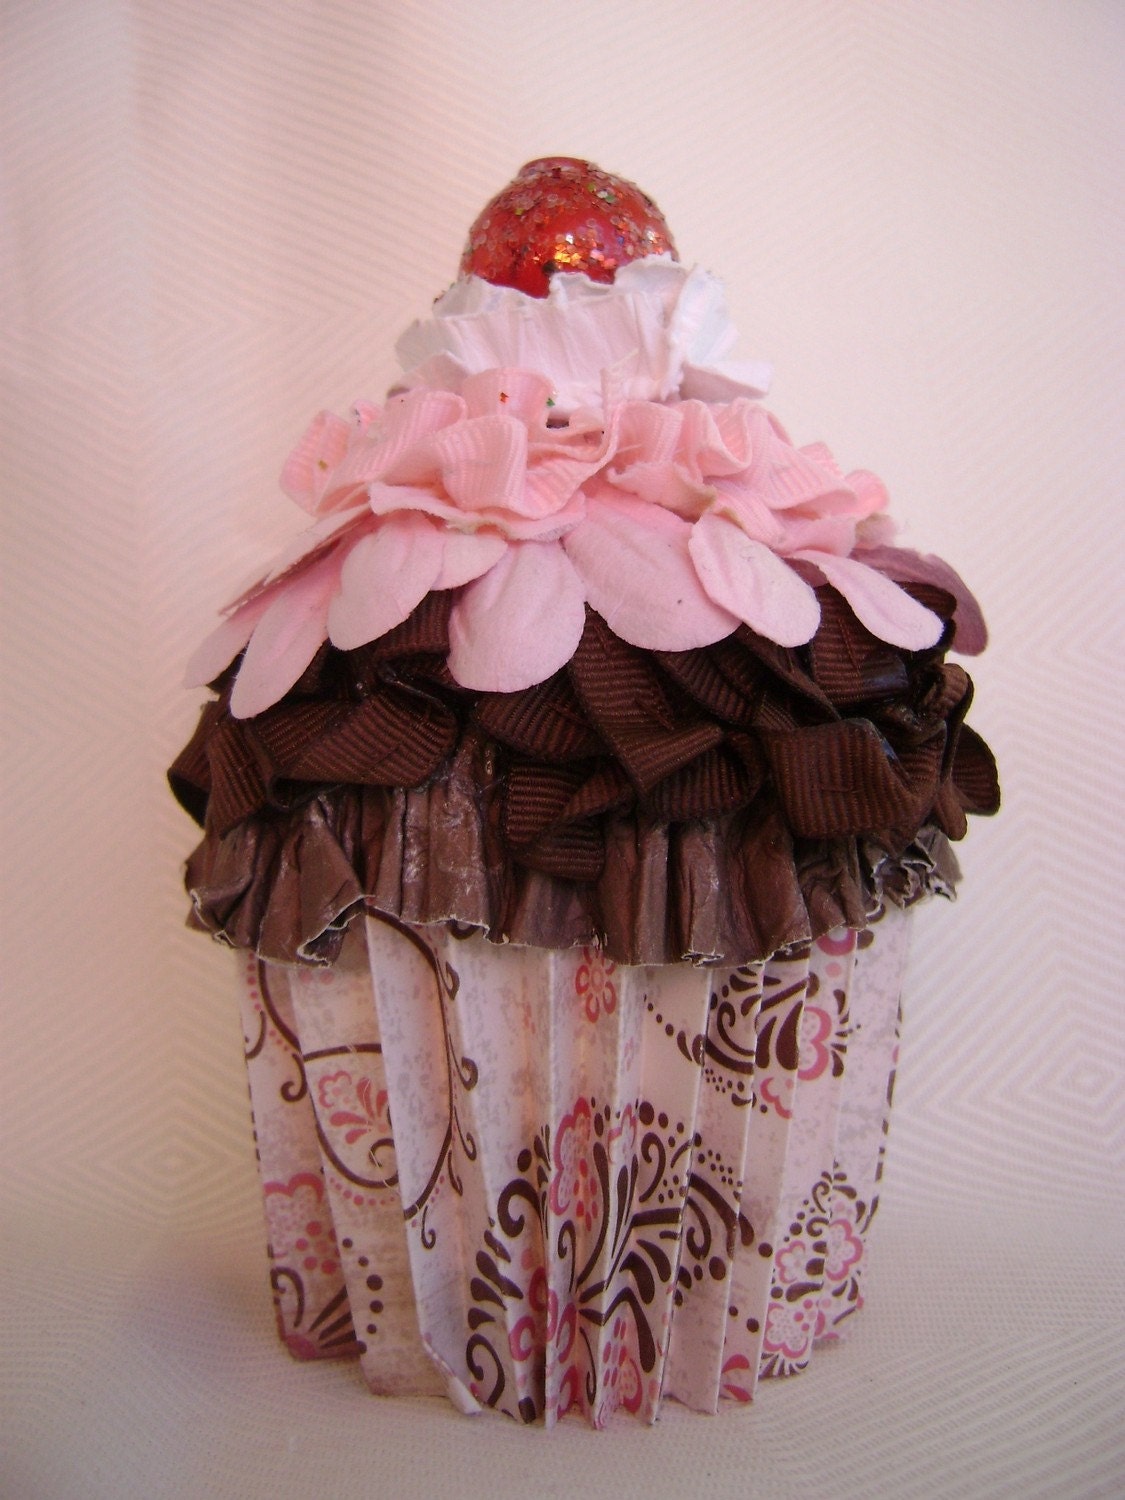 cupcake gift card holder with a cherry on top